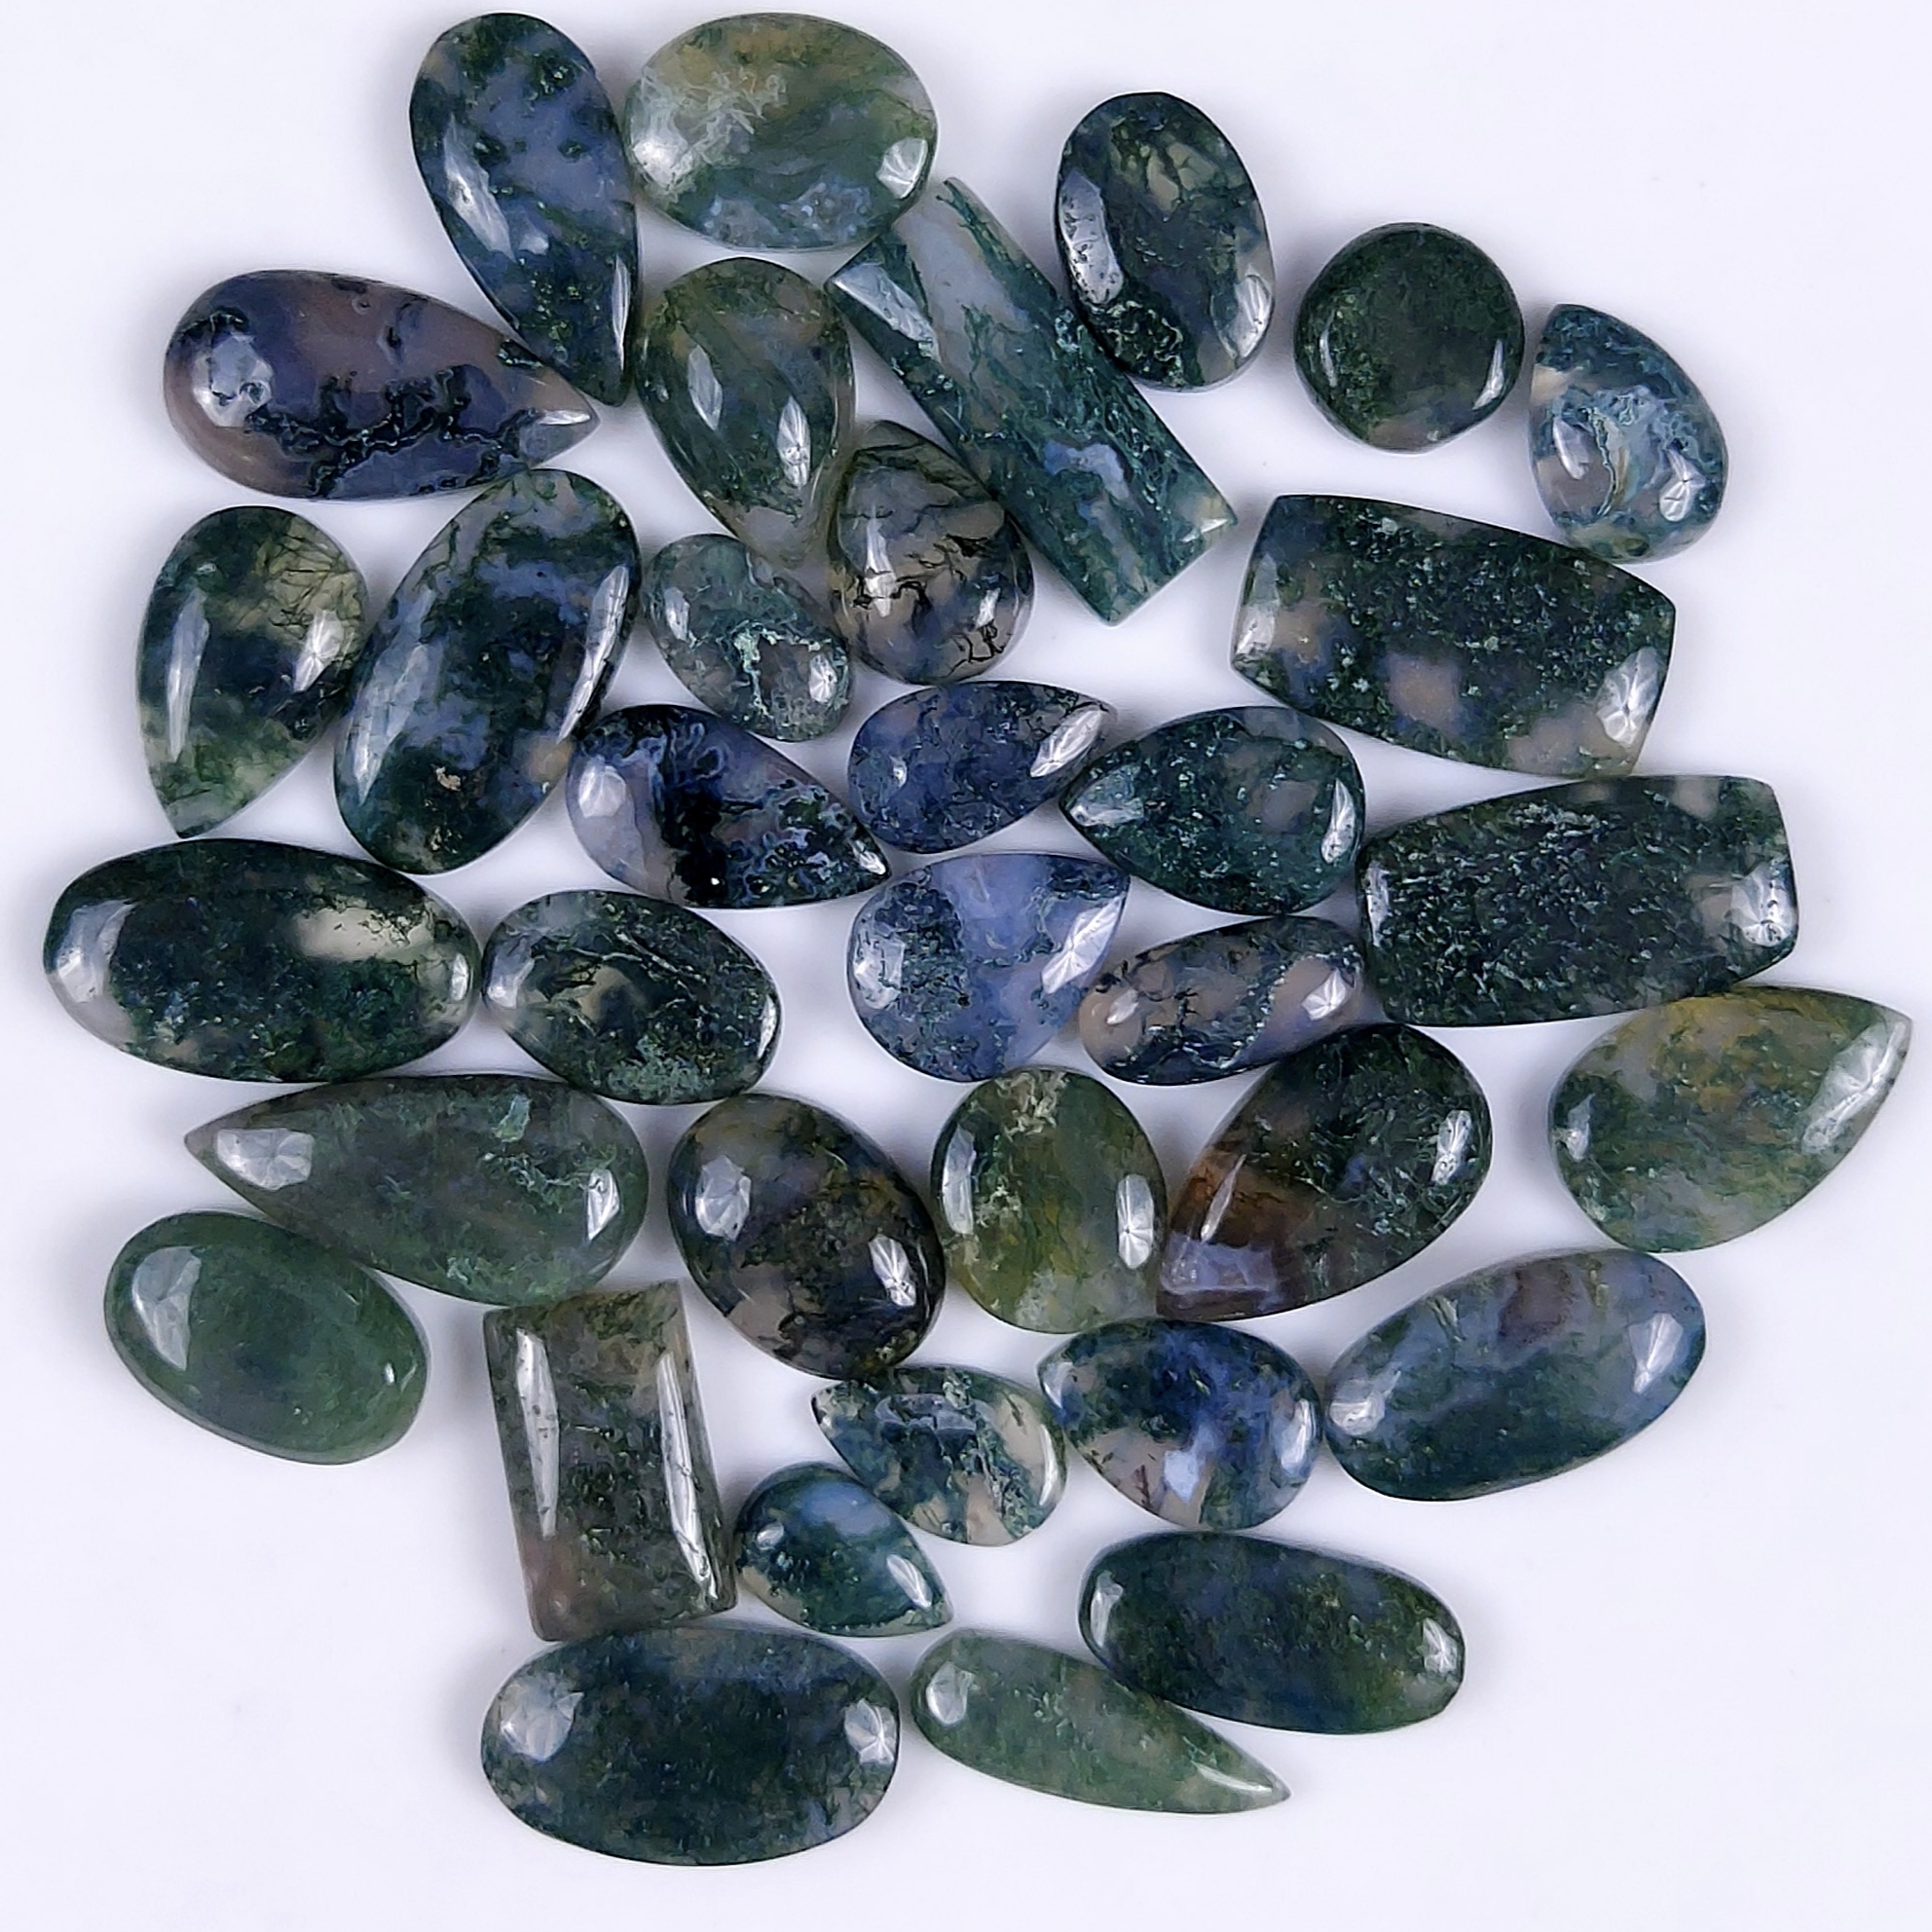 35Pcs 219Cts Natural Green Moss Agate Cabochon Lots Mixed Shapes And Sizes Moss Agate loose gemstone Cabochon Wholesale Lot 18x8 10x5mm#G-365